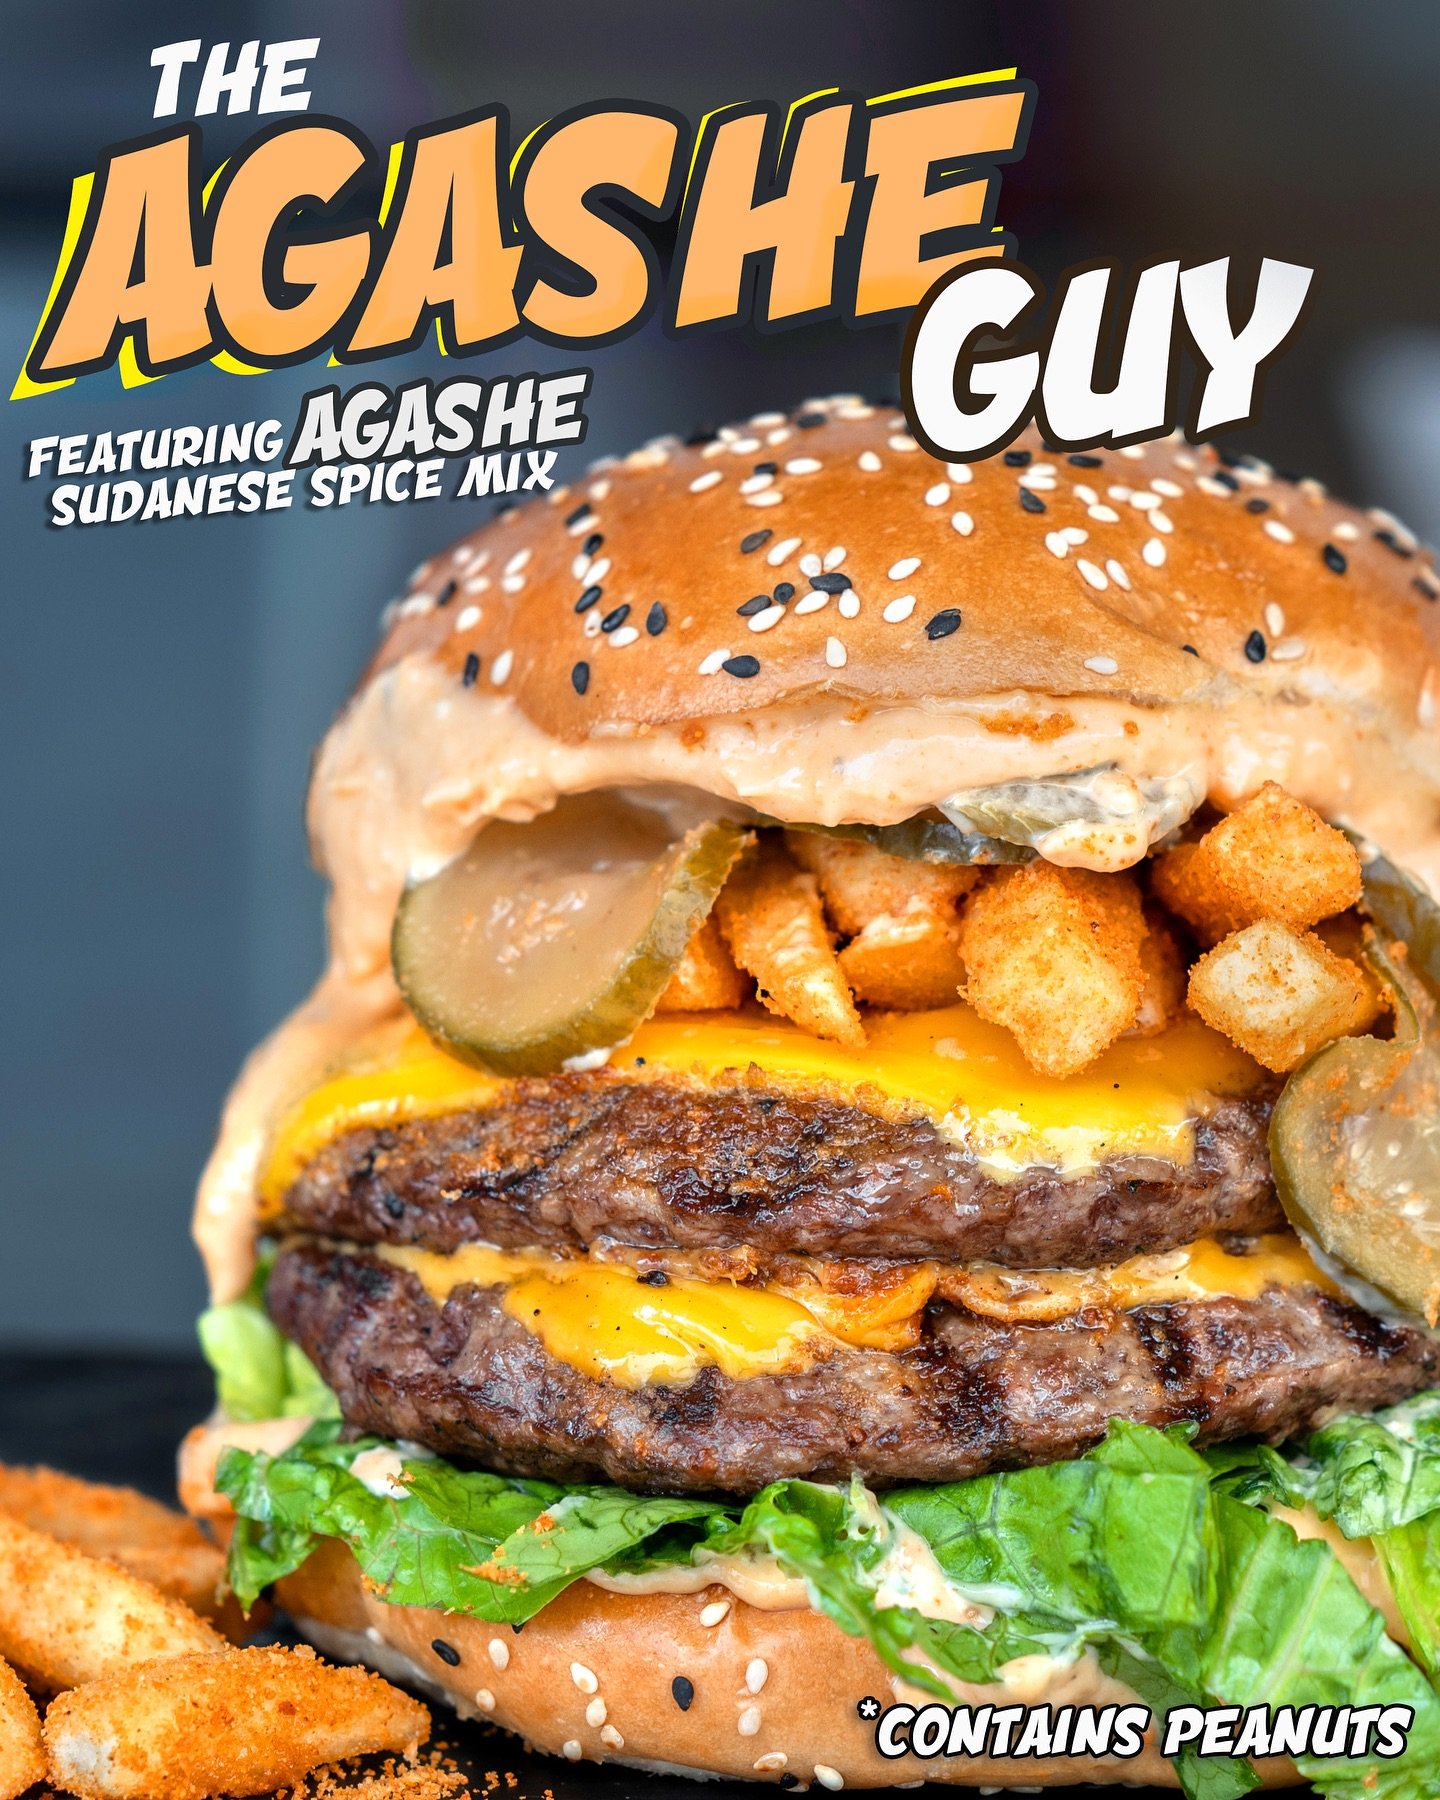 The Agashe Guy
From Sudanese celebrity chef @monzirhamdin , featuring his popular Agashe spice mix, we bring you burger of the week. A culinary journey into Sudanese cuisine!😋🍔
&bull;BEEF patty x2
&bull;Special AGASHE mayo* 
&bull;AGASHE seasoned f